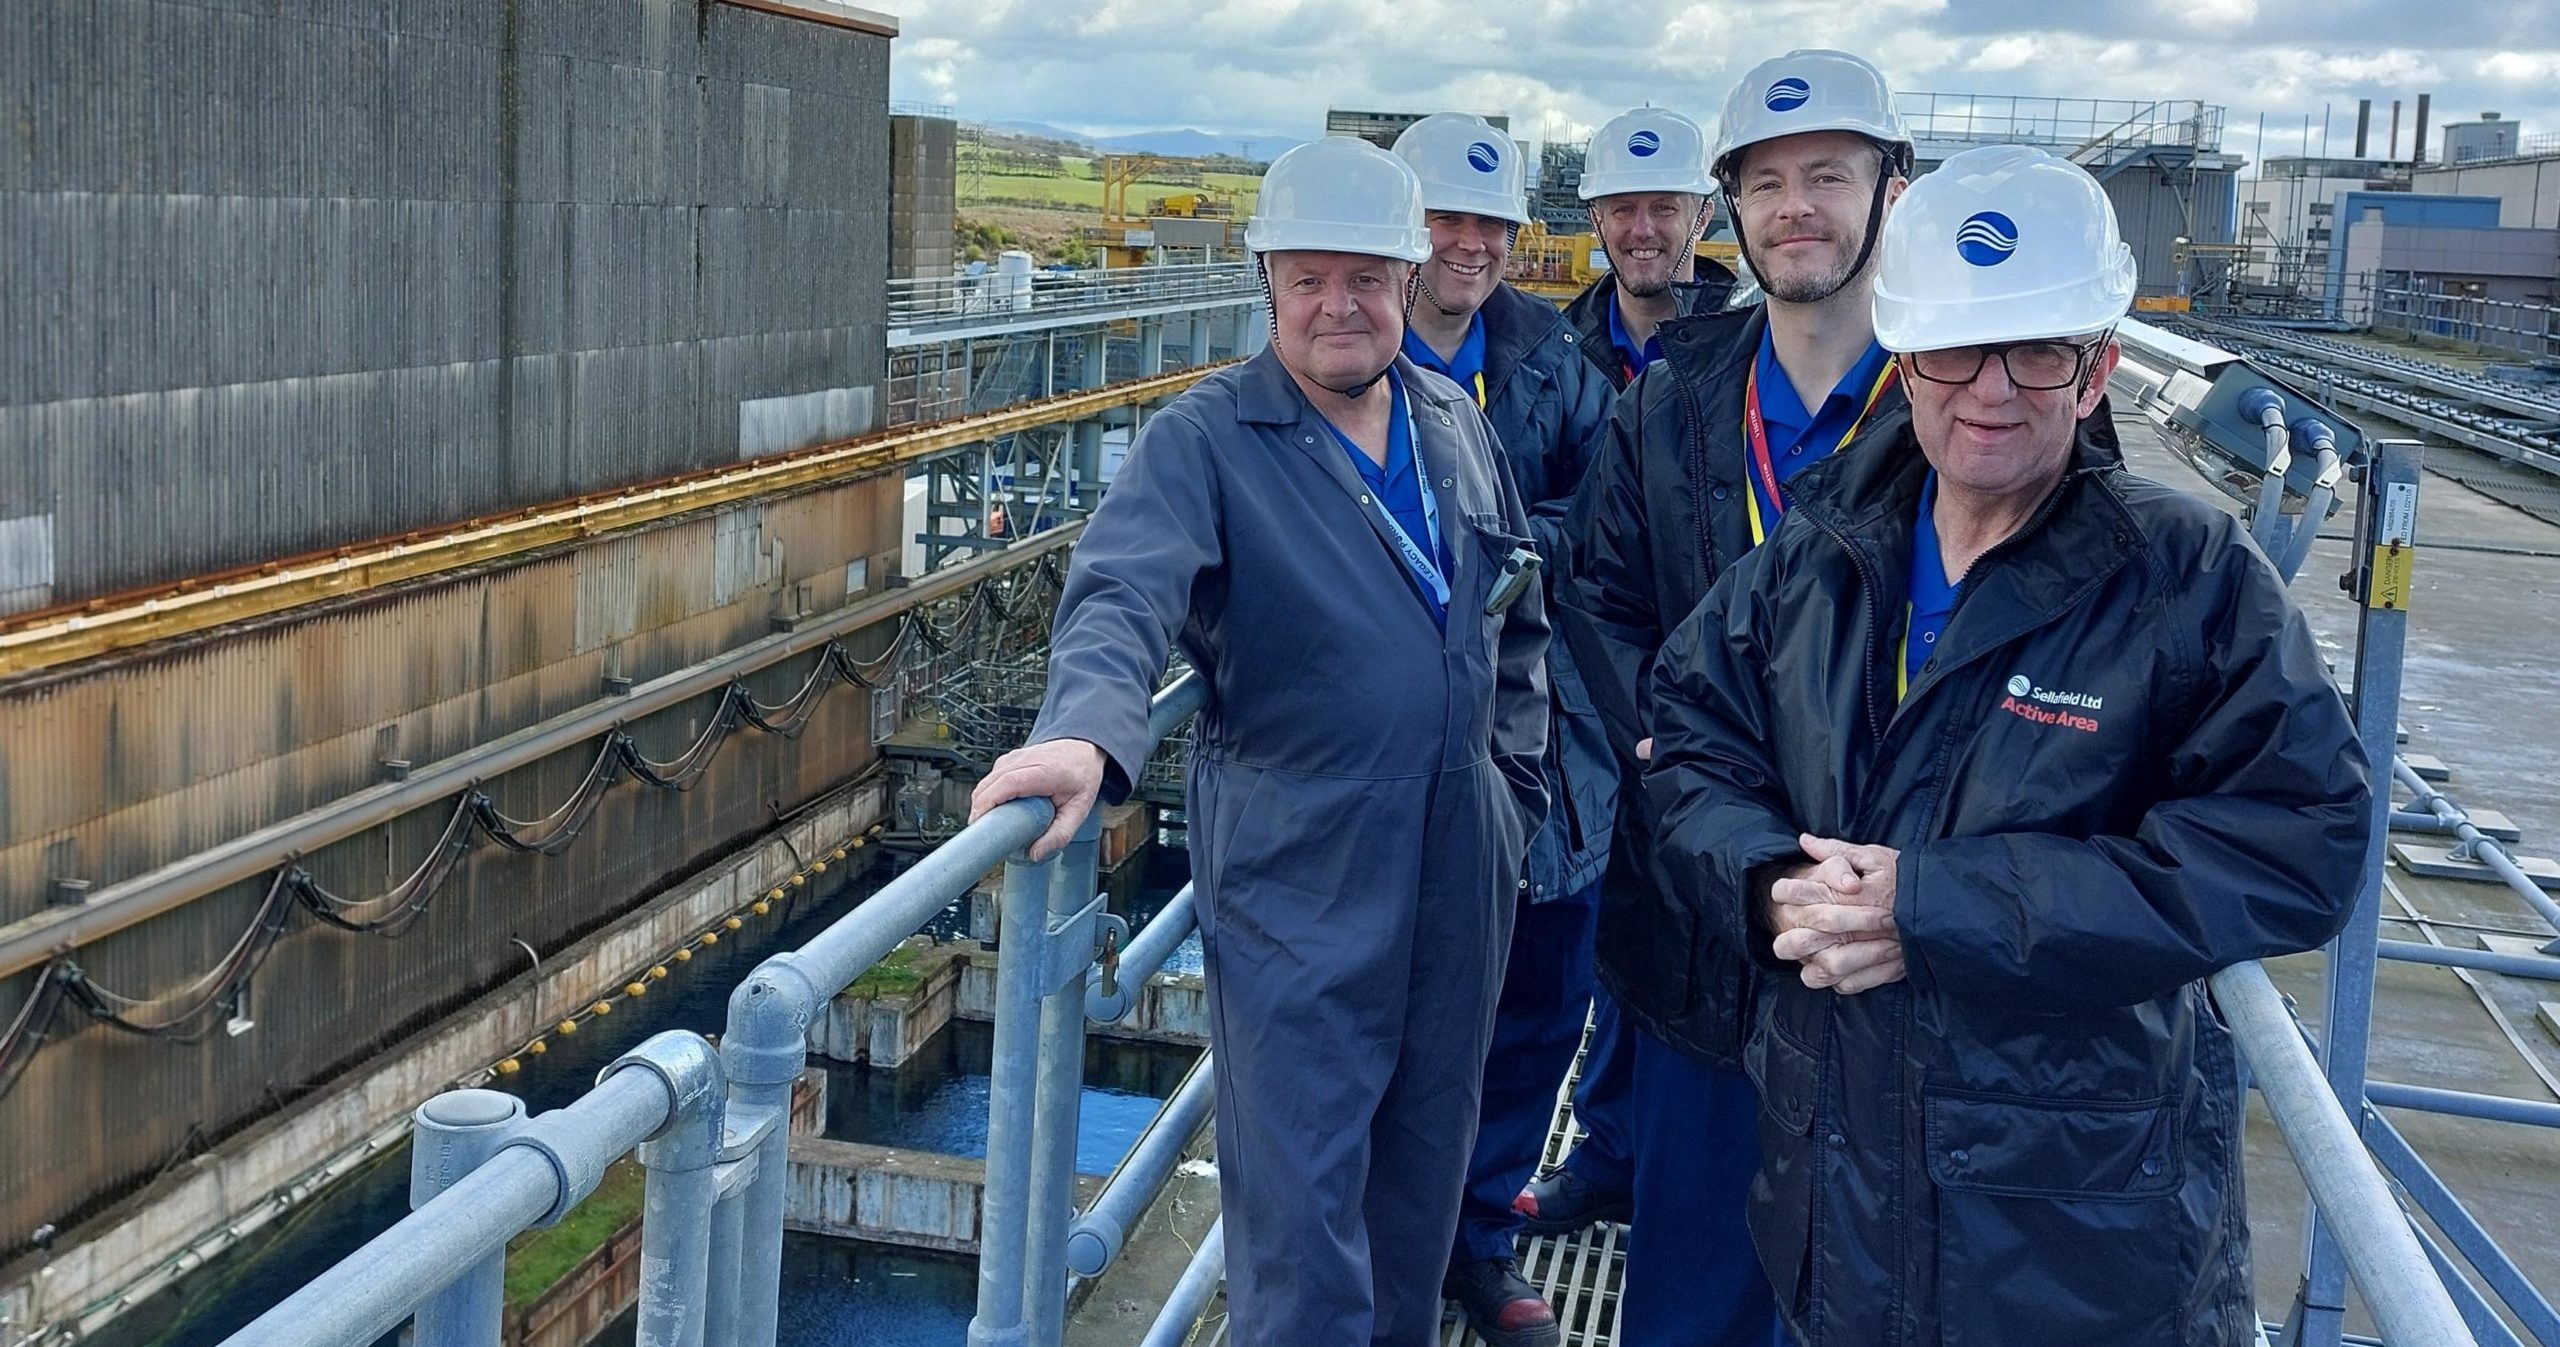 Andrew Hockey Far Right And ECITB Colleagues David Nash And Thomas Docherty On A Recent Tour Of The Sellafield Plant In Cumbria Scaled 1 Aspect Ratio 760 400